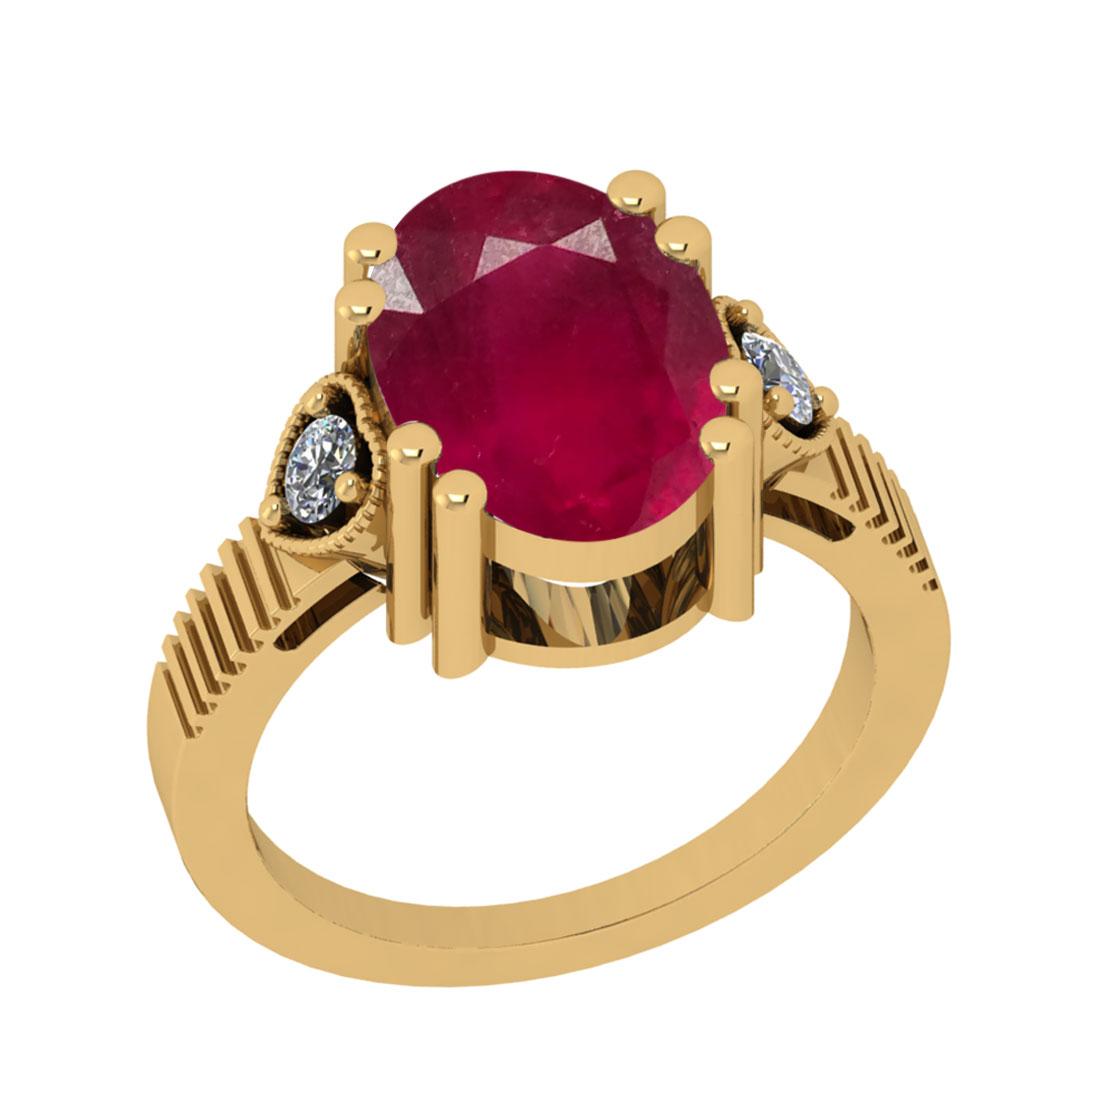 5.60 CtwSI2/I1 Ruby And Diamond 14K Yellow Gold Vintage Style Ring